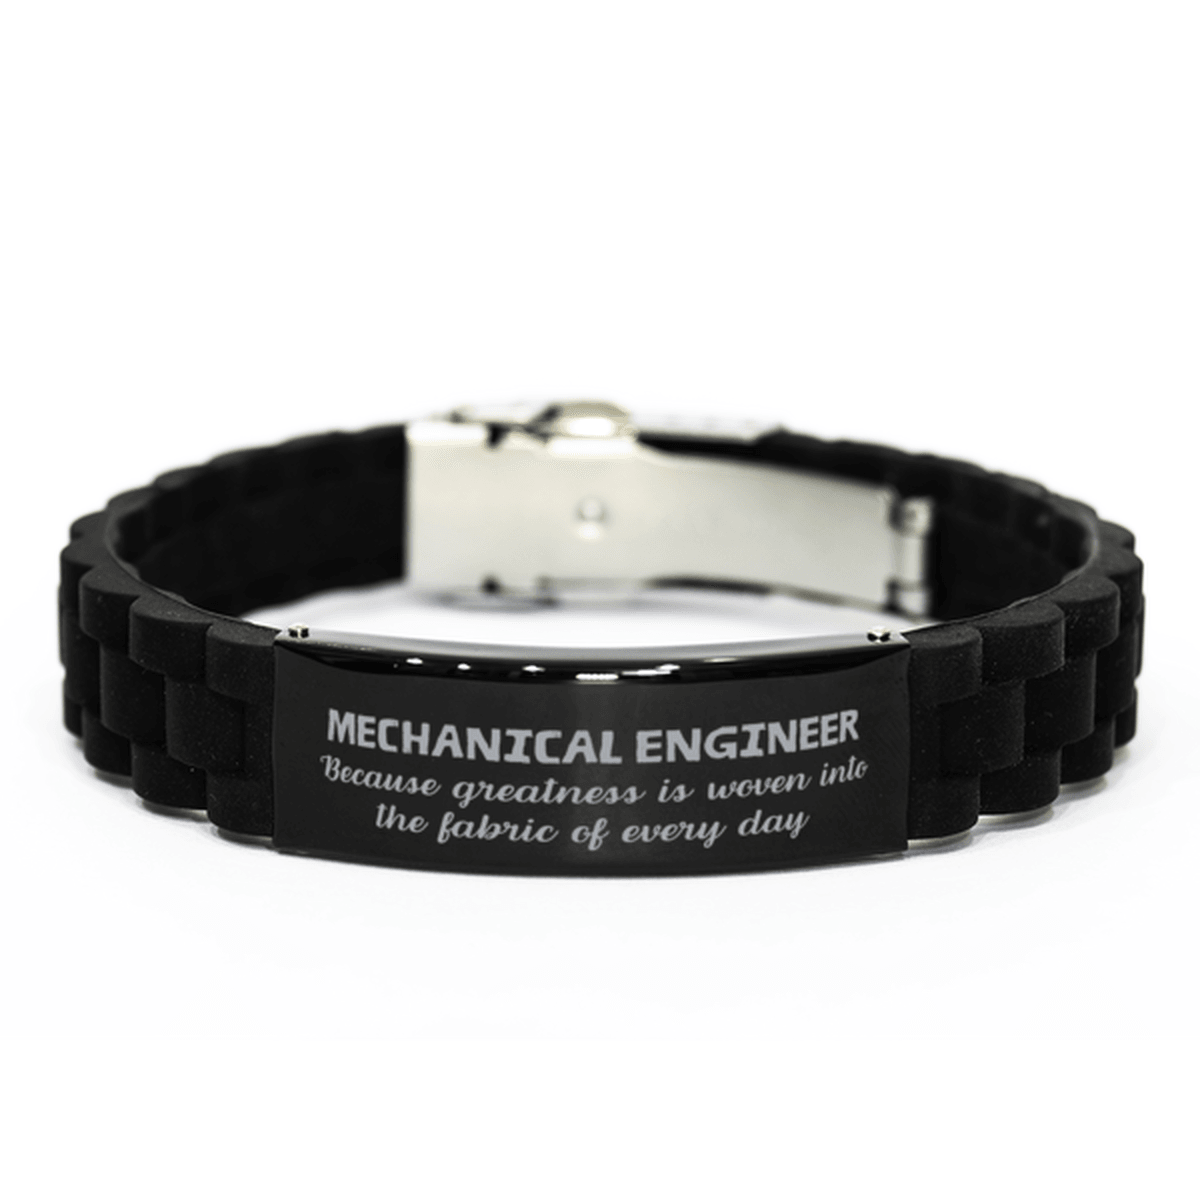 Sarcastic Mechanical Engineer Black Glidelock Clasp Bracelet Gifts, Christmas Holiday Gifts for Mechanical Engineer Birthday, Mechanical Engineer: Because greatness is woven into the fabric of every day, Coworkers, Friends - Mallard Moon Gift Shop